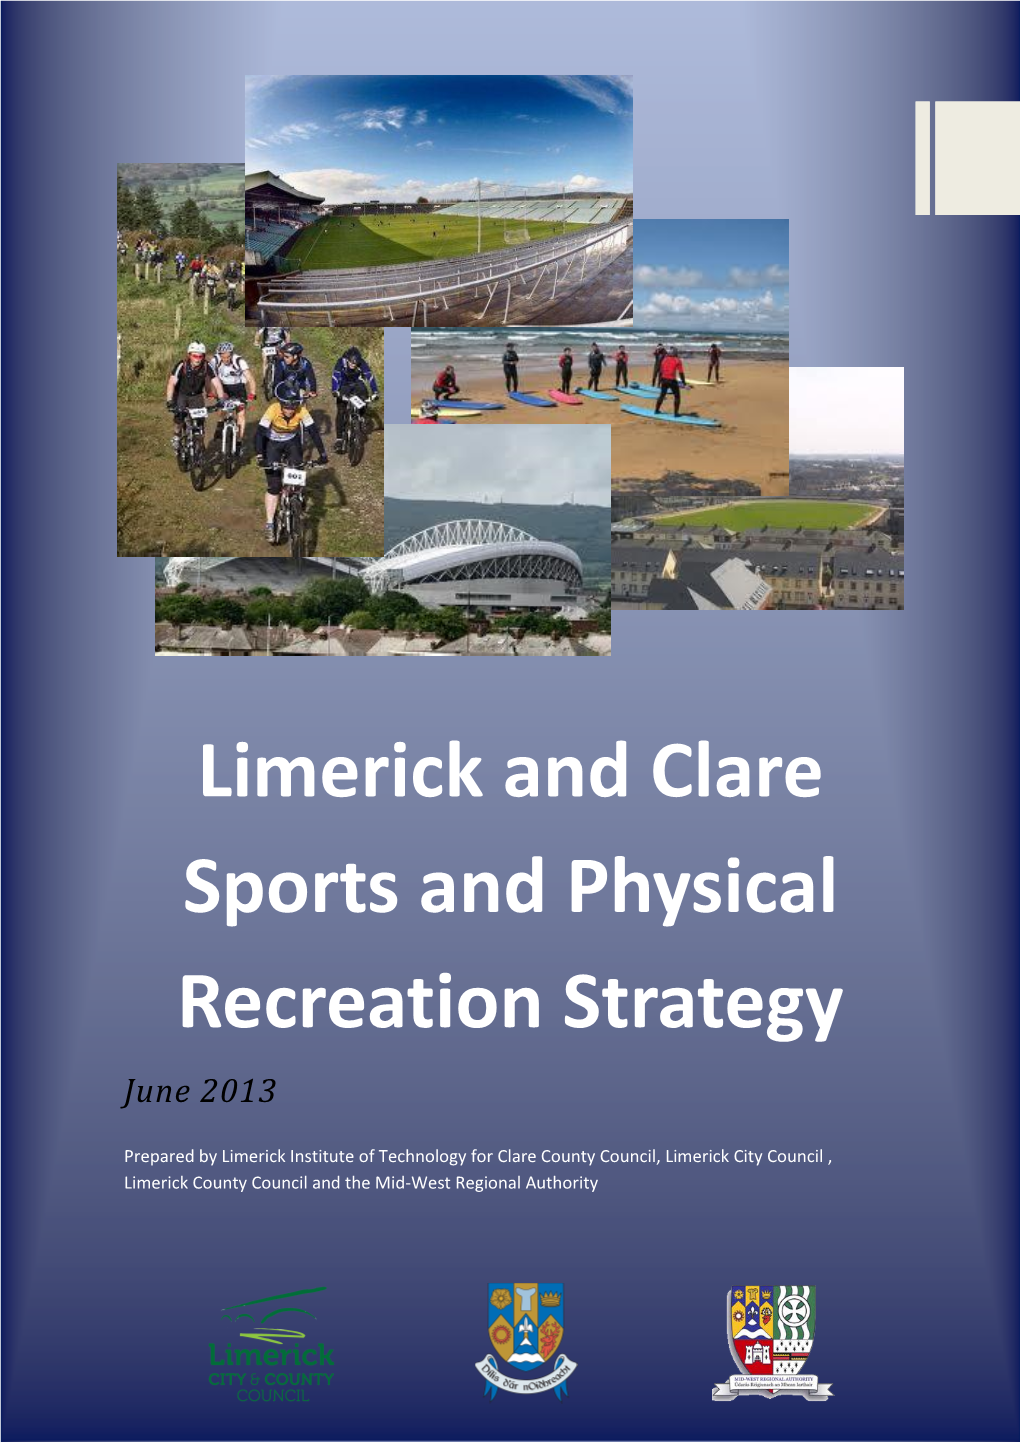 Limerick and Clare Sports and Physical Recreation Strategy